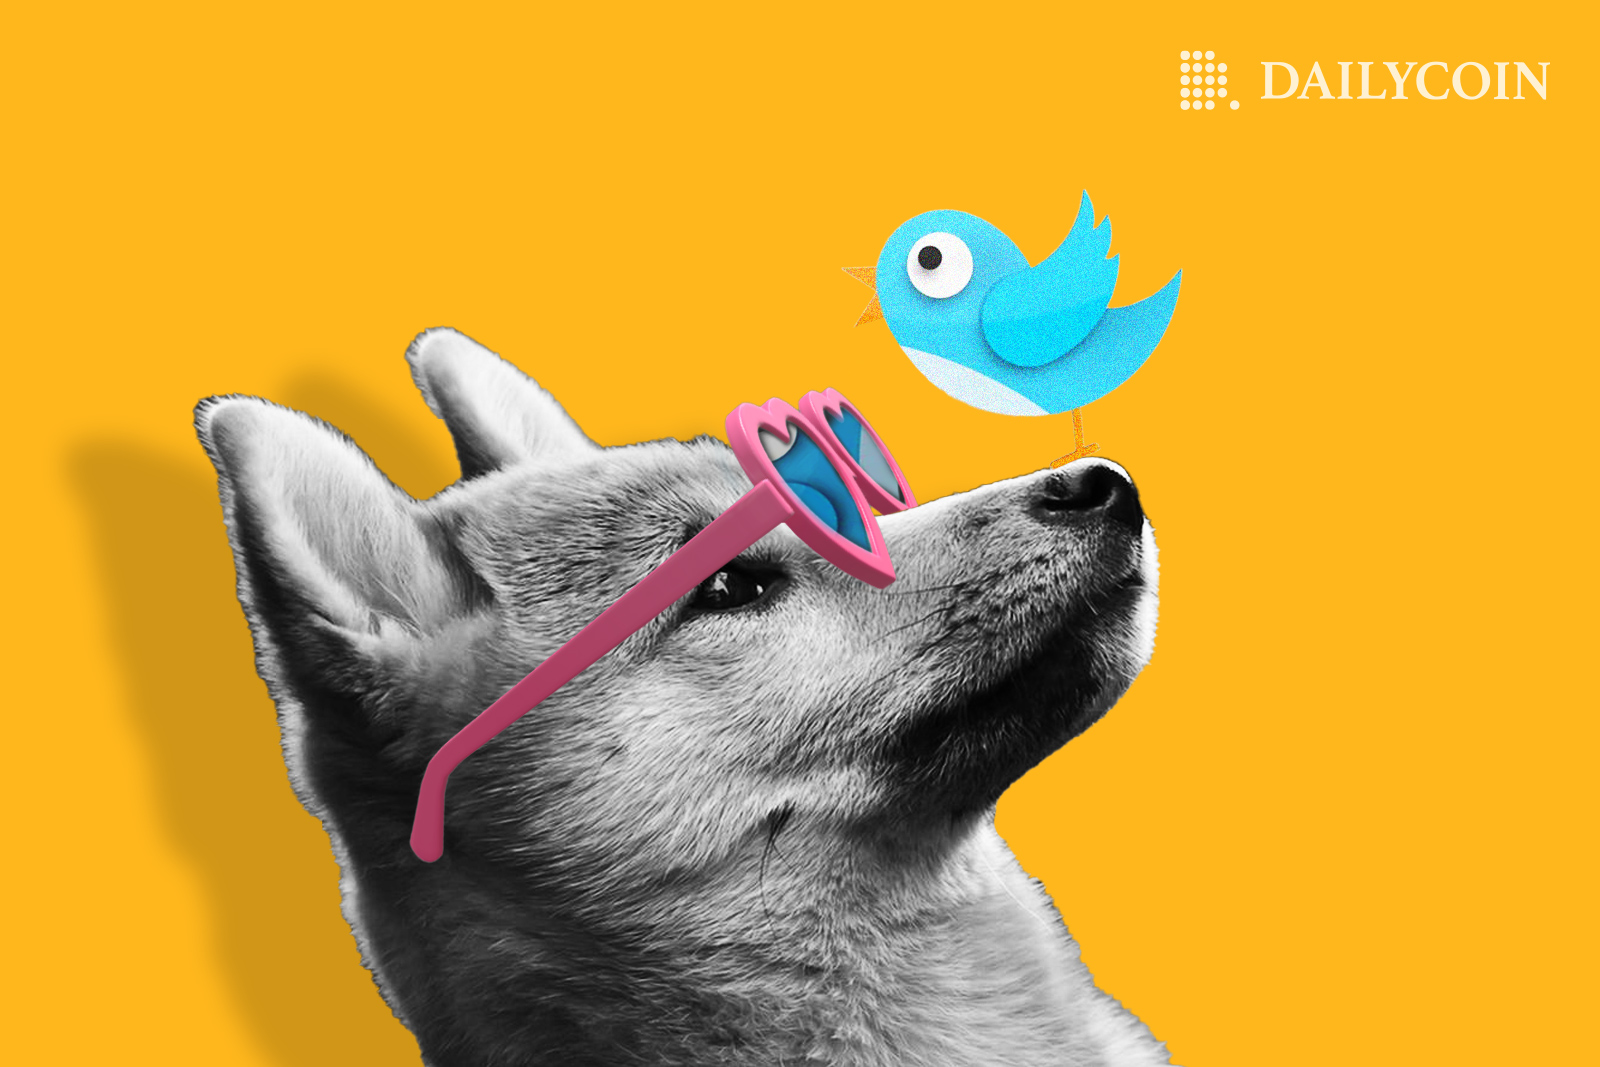 Doge with pink sunglasses on, looking at a blue bird on its nose.